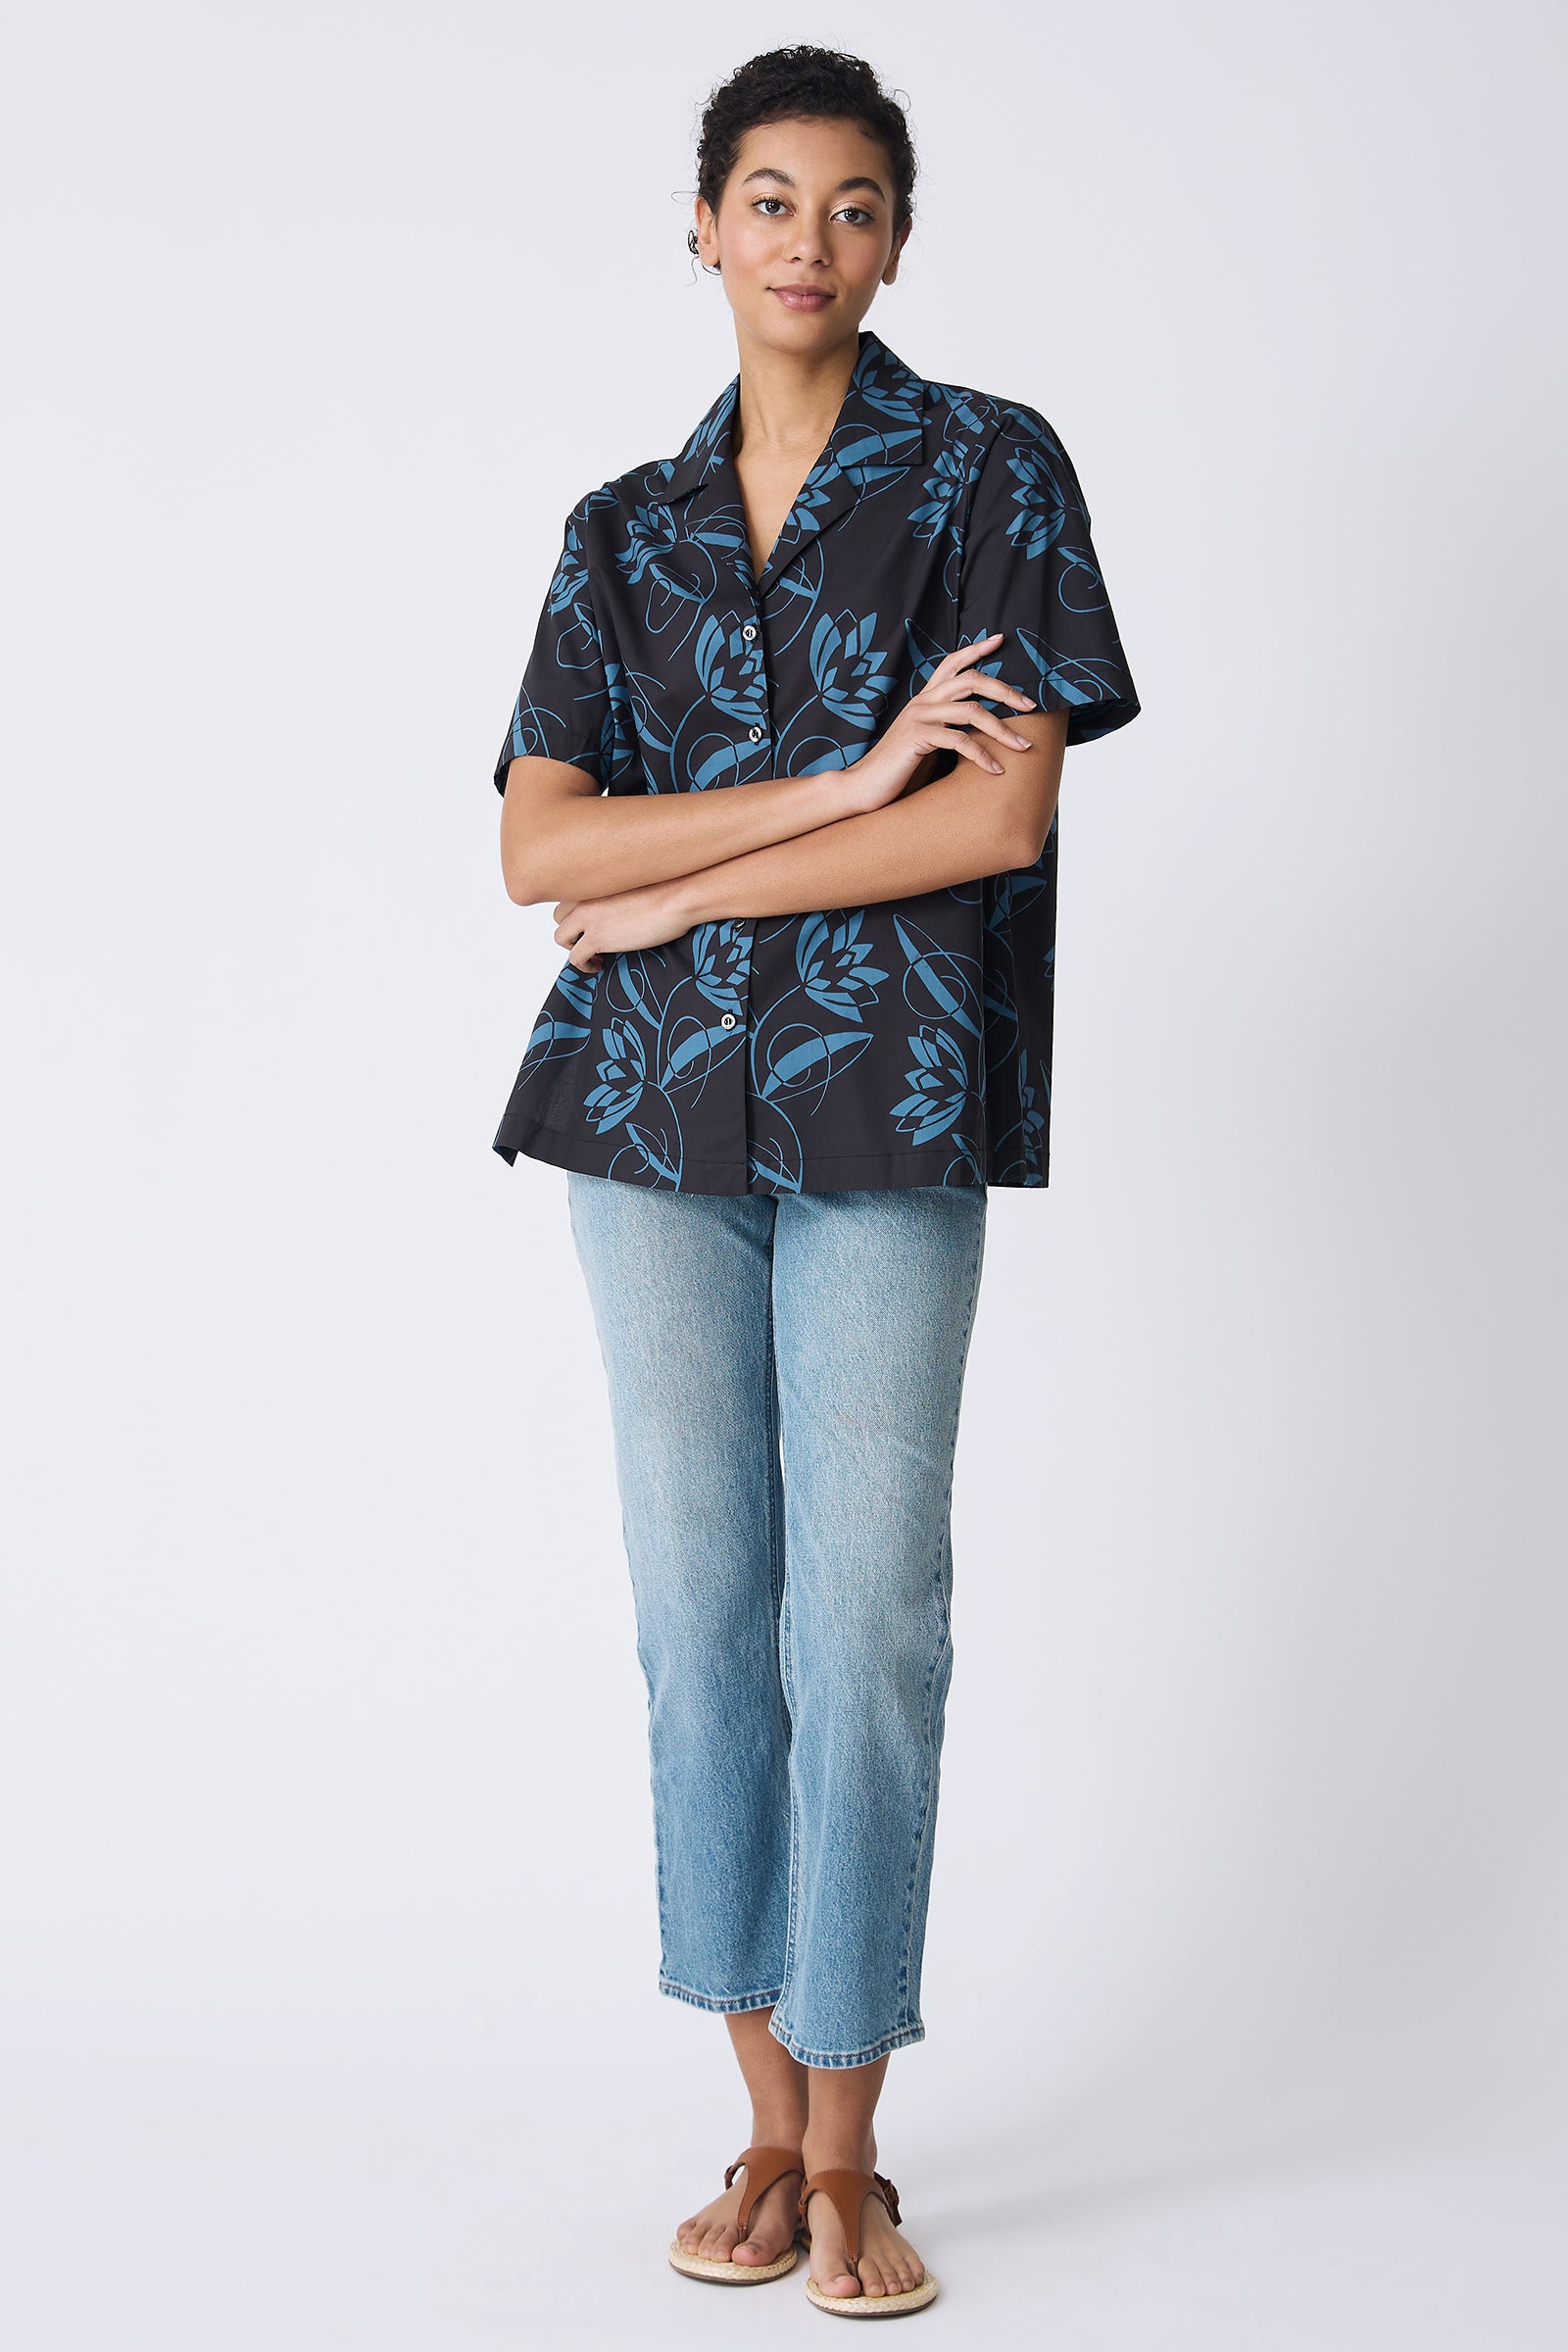 Kal Rieman Vacation Shirt in Lotus Print Blue on model with arms crossed full front view